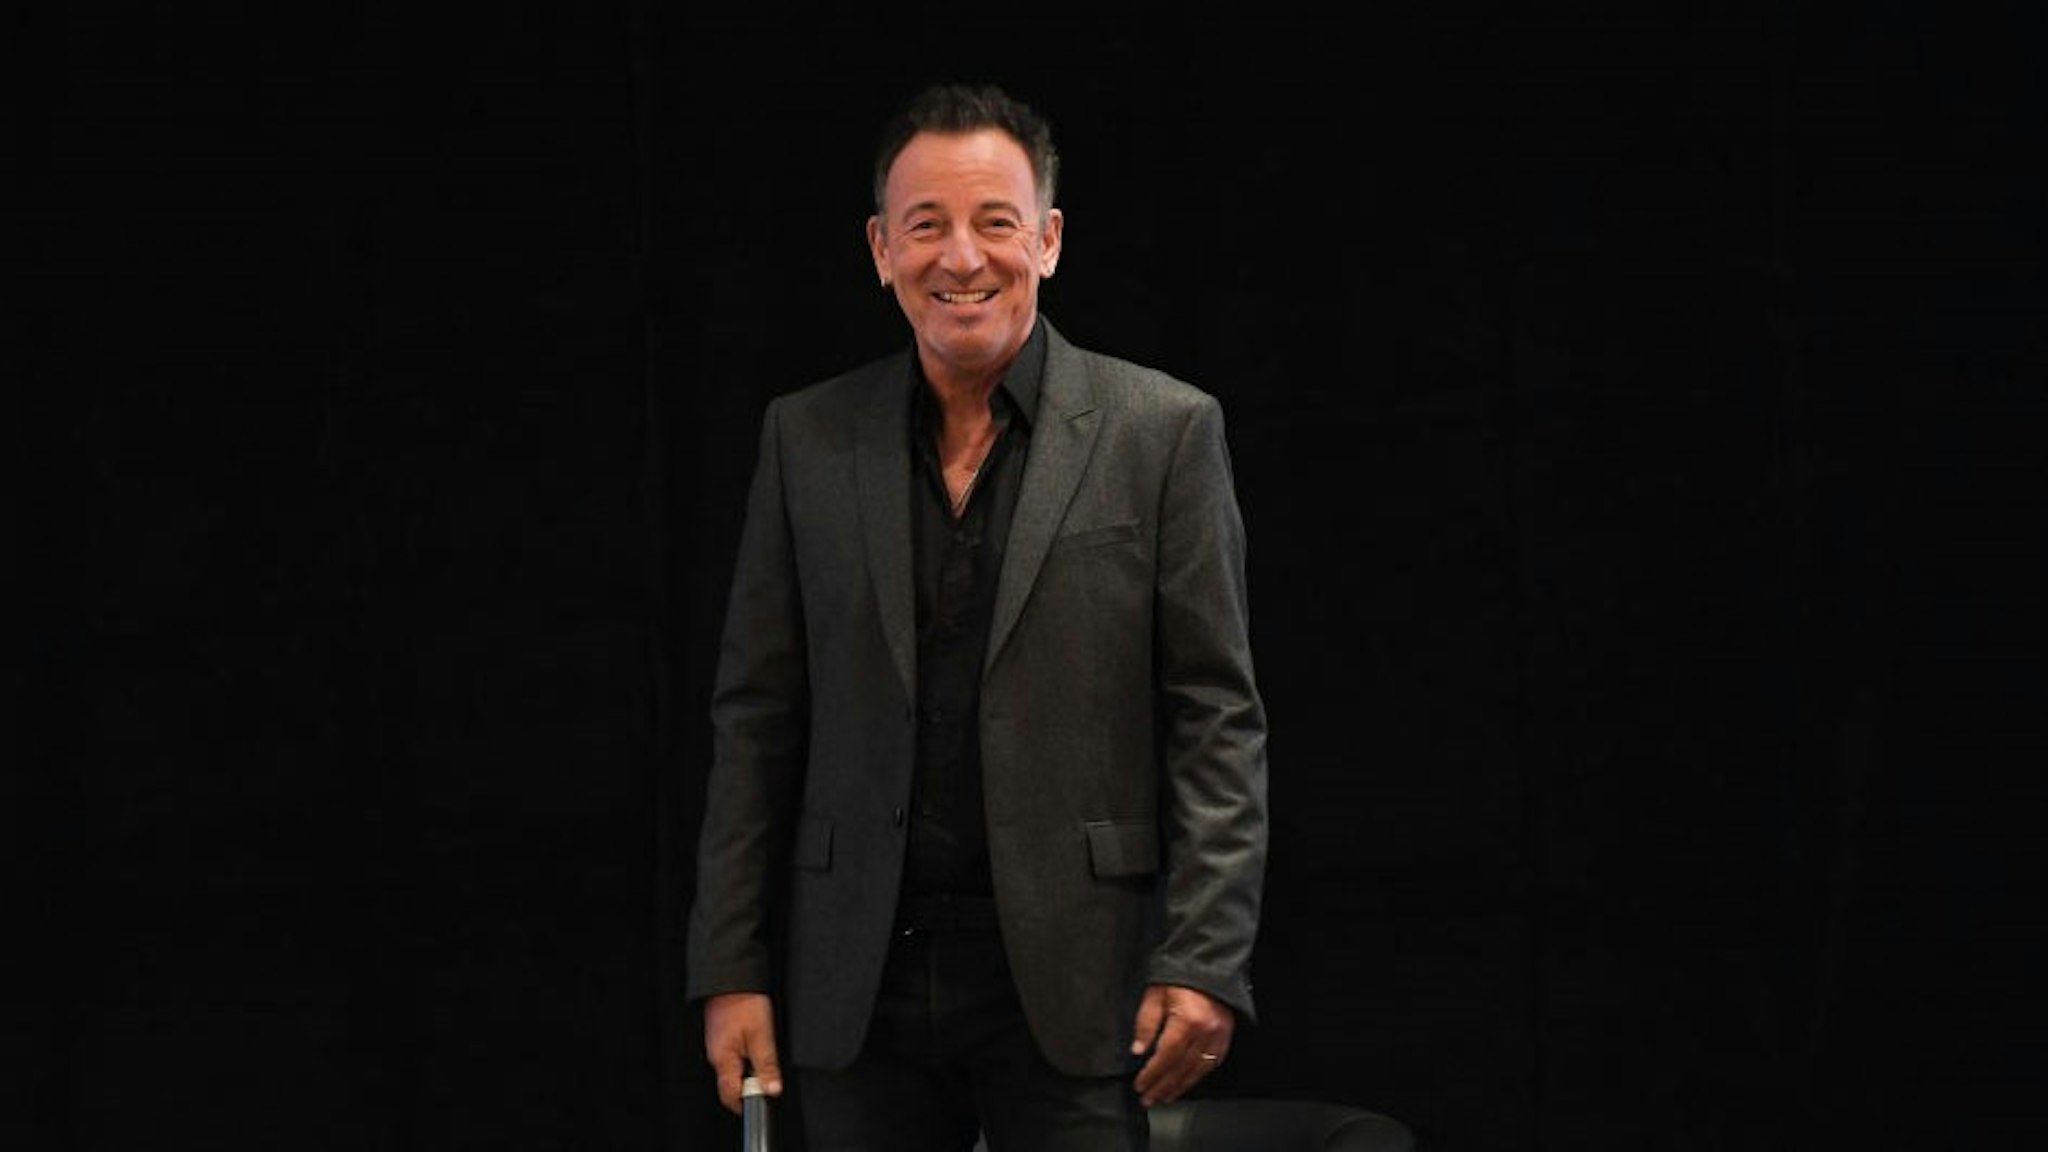 ATTENTION BLOCKING PERIOD 20 OCTOBER 2016 7.30 PM ! US-American rock musician Bruce Springsteen during a press call at the Frankfurt Book Fair in Frankfurt/Main, Germany, 20 October 2016. During the book fair, he spoke on his auto biography 'Born to run'. PHOTO: ARNE DEDERT/dpa | usage worldwide (Photo by